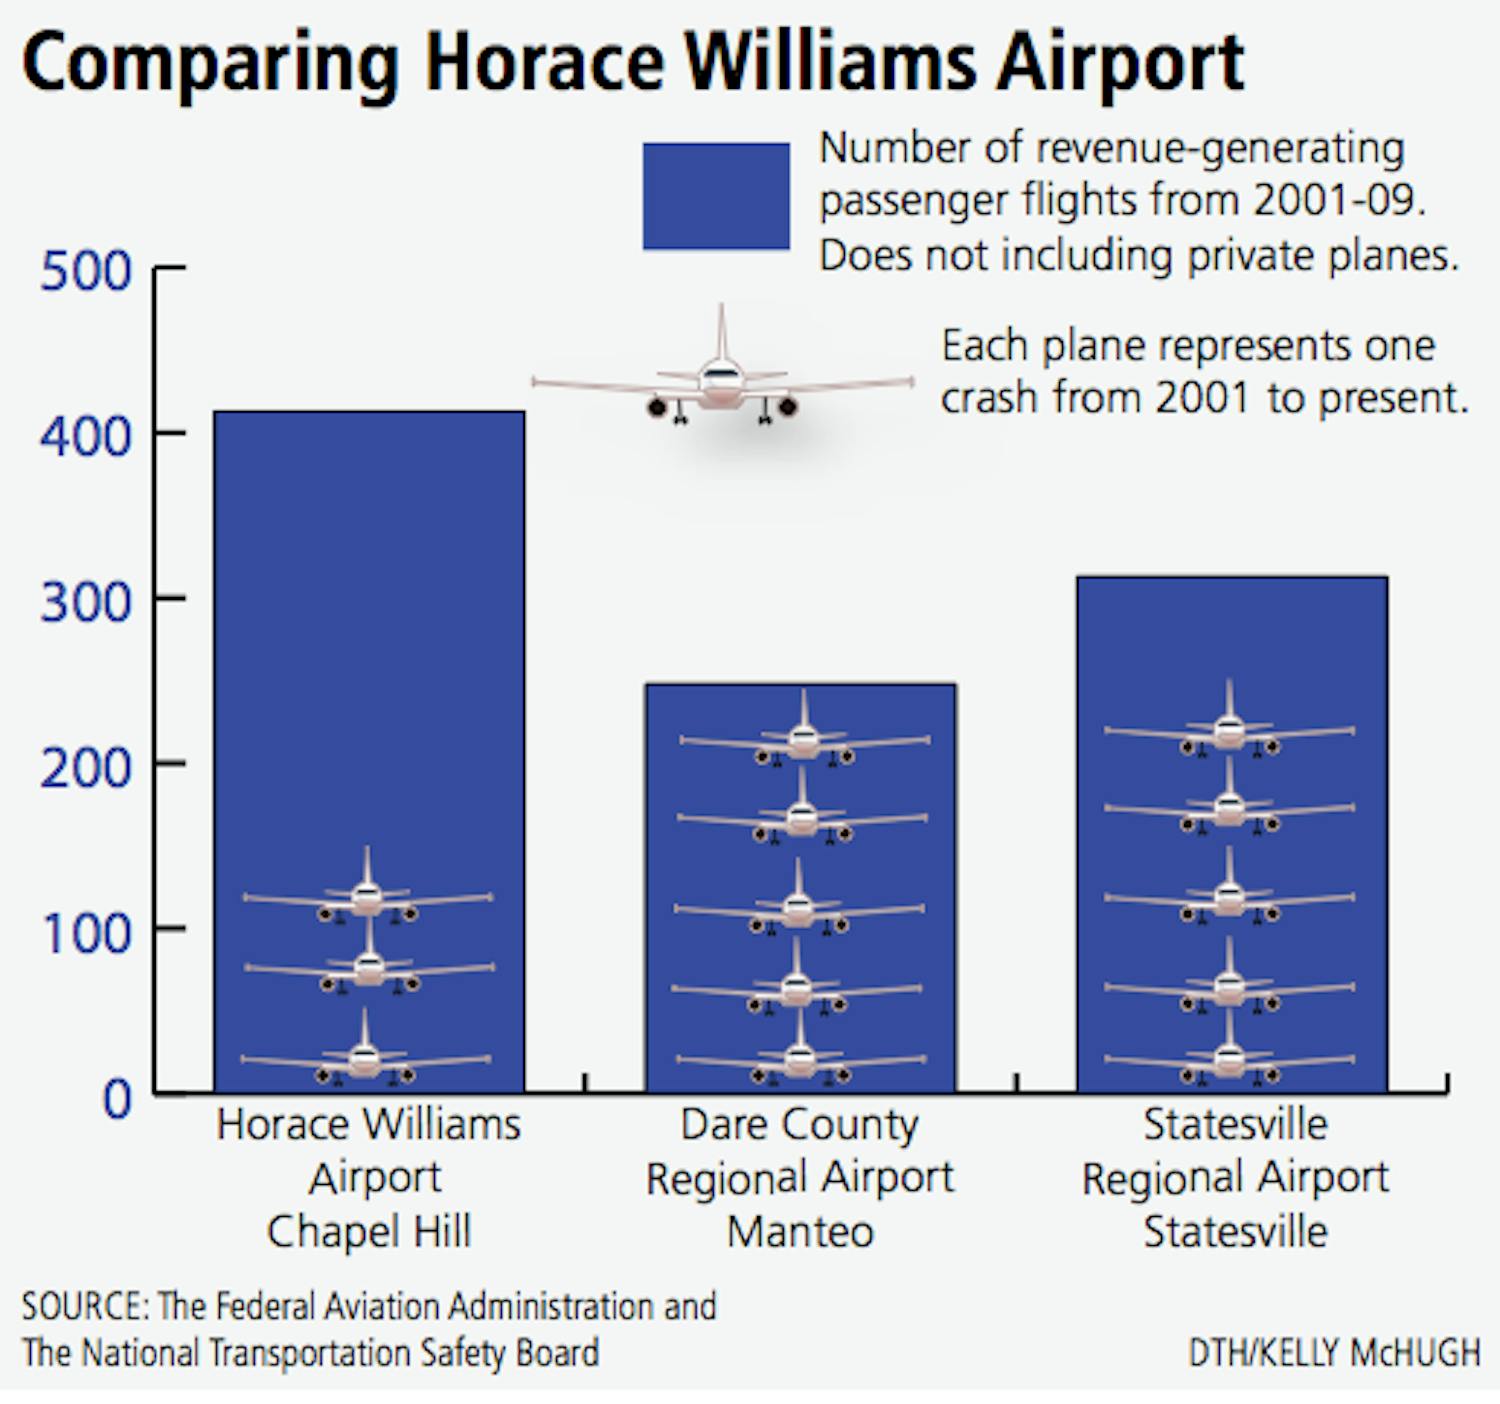 Comparing Horace Williams Airport